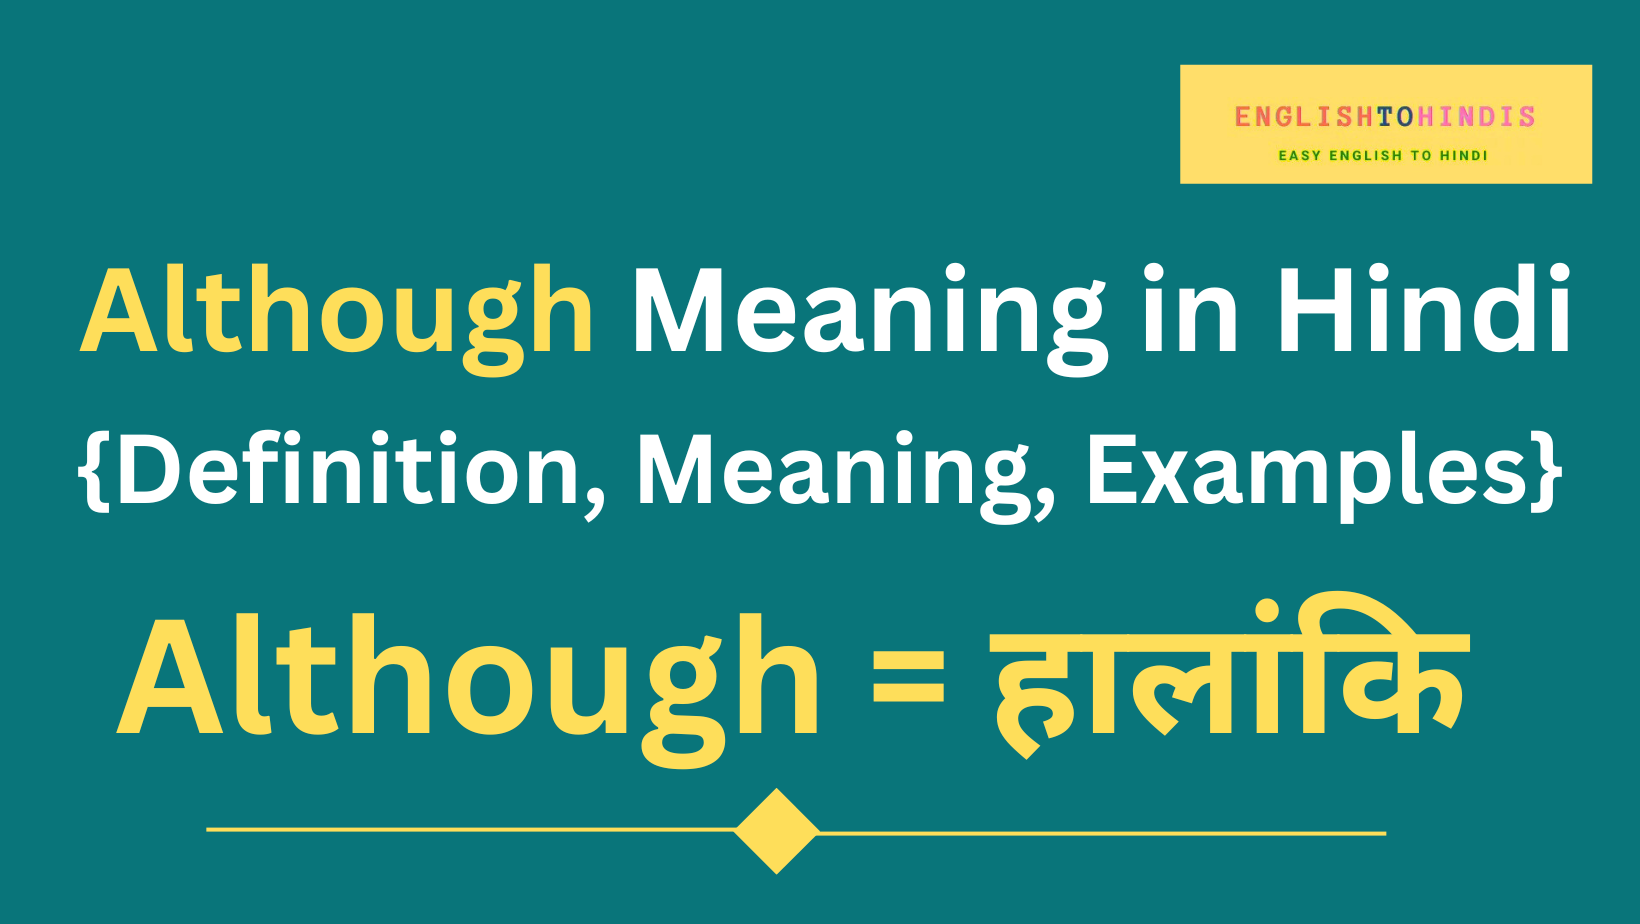 Although Meaning in Hindi